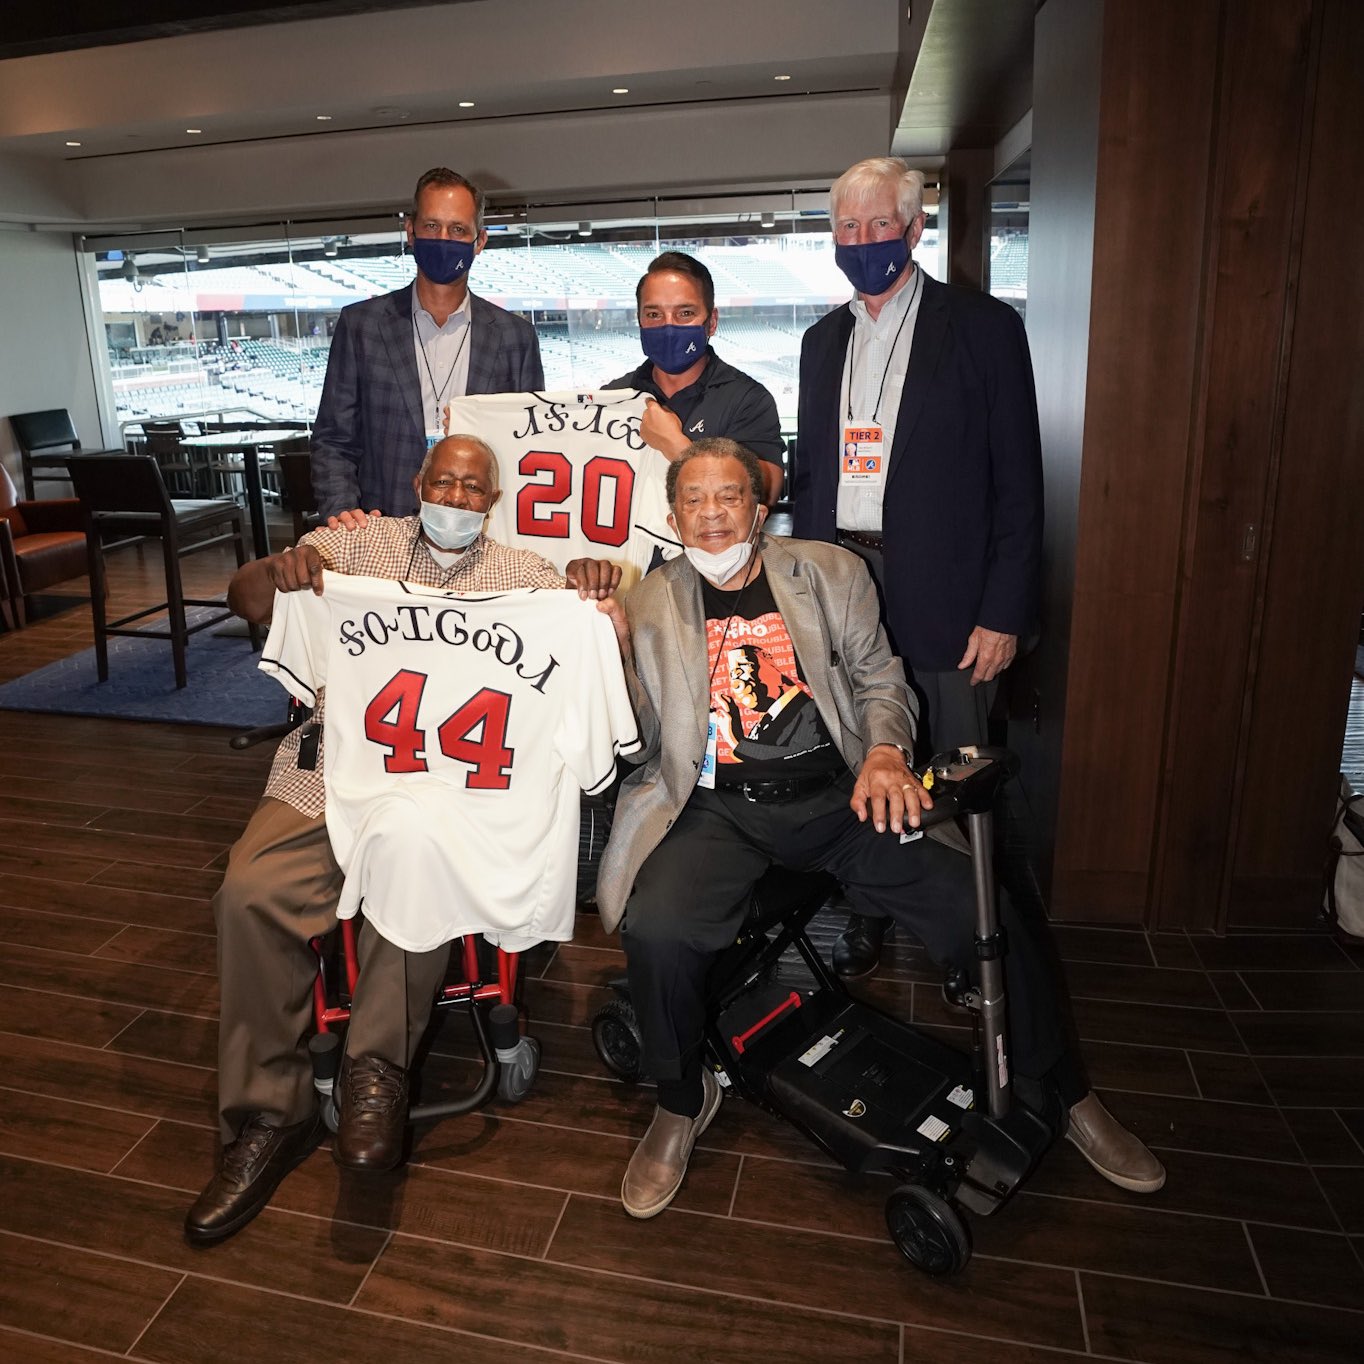 Atlanta Braves on X: Before tonight's game, @HenryLouisAaron, Ambassador  Andrew Young and Braves executives welcomed Principal Chief Richard Sneed  of the Eastern Band of Cherokee Indians to @TruistPark. The names on the